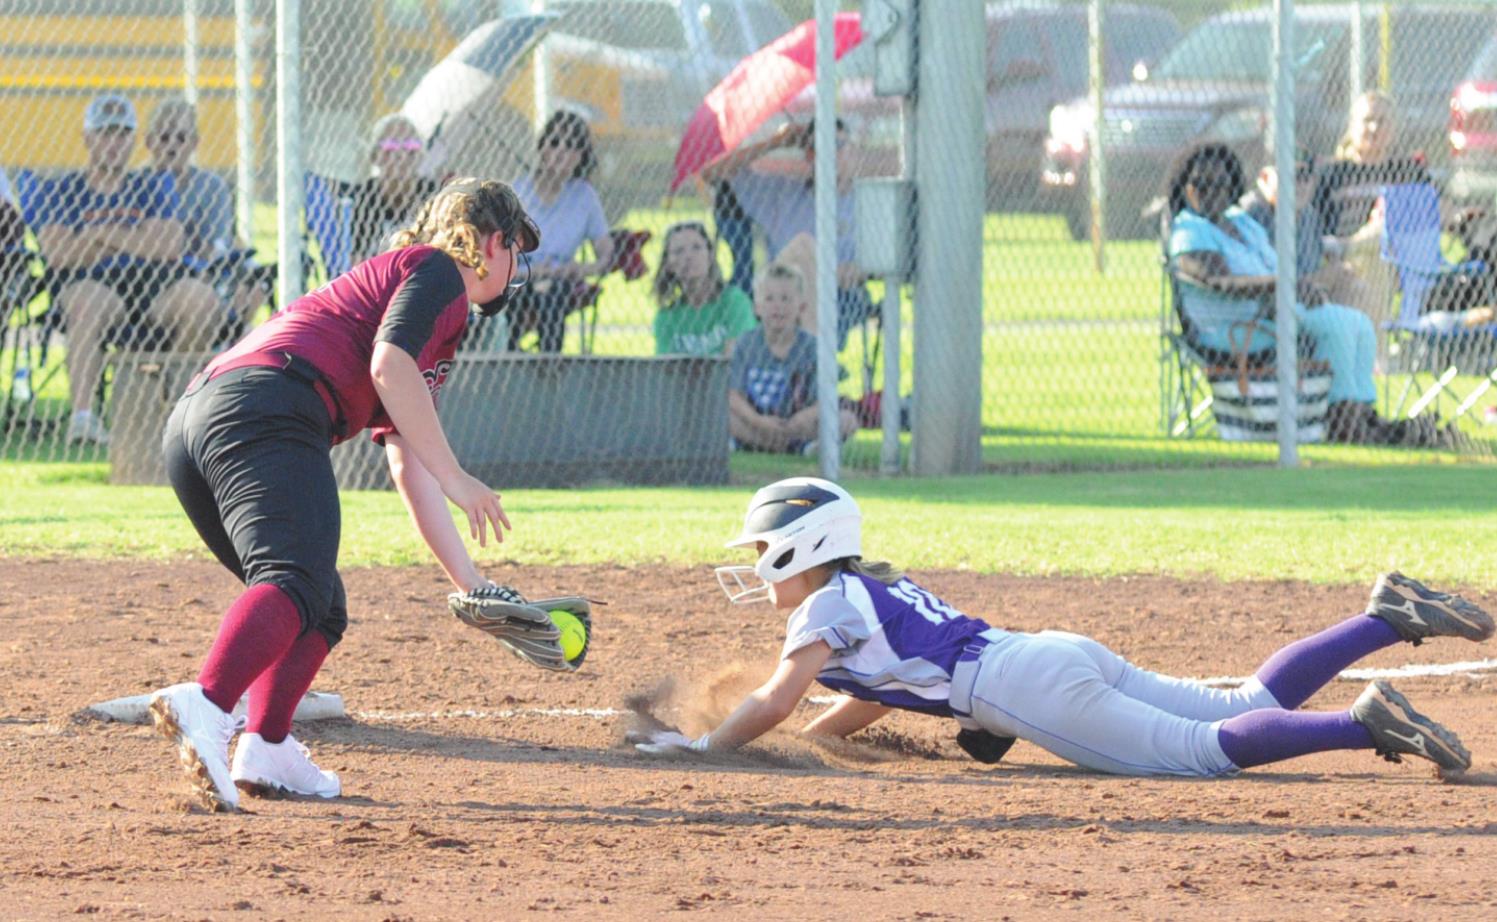 Weatherford’s Randi Helt attempts to tag out Hydro-Eakly’s Tessa York as she slides into third base. Josh Burton/WDN